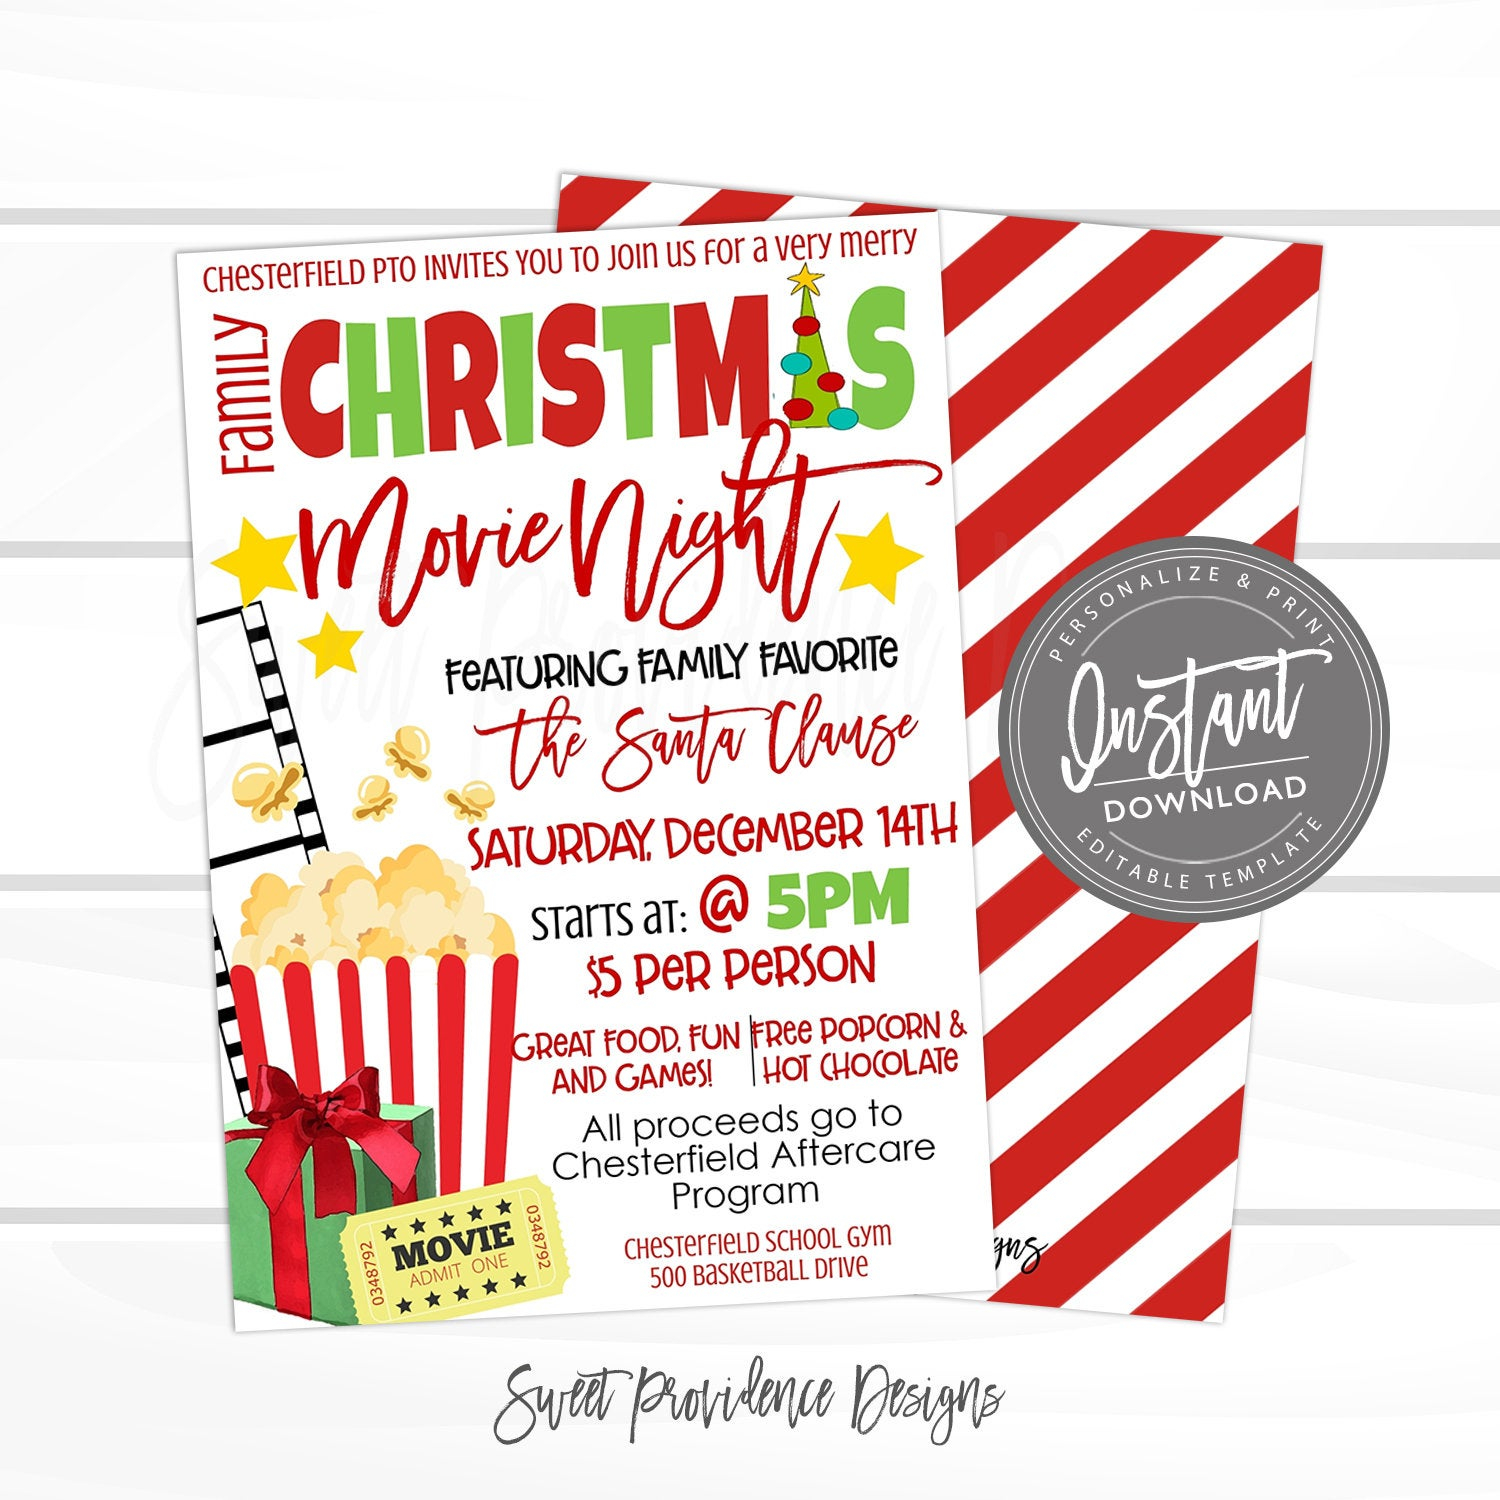 Holiday Flyer, Editable Christmas Movie Night Flyer Invite, Cinema Holiday  Movie Night Church flyer School template, Instant Access Edit Now In Church Movie Night Flyer Template Throughout Church Movie Night Flyer Template